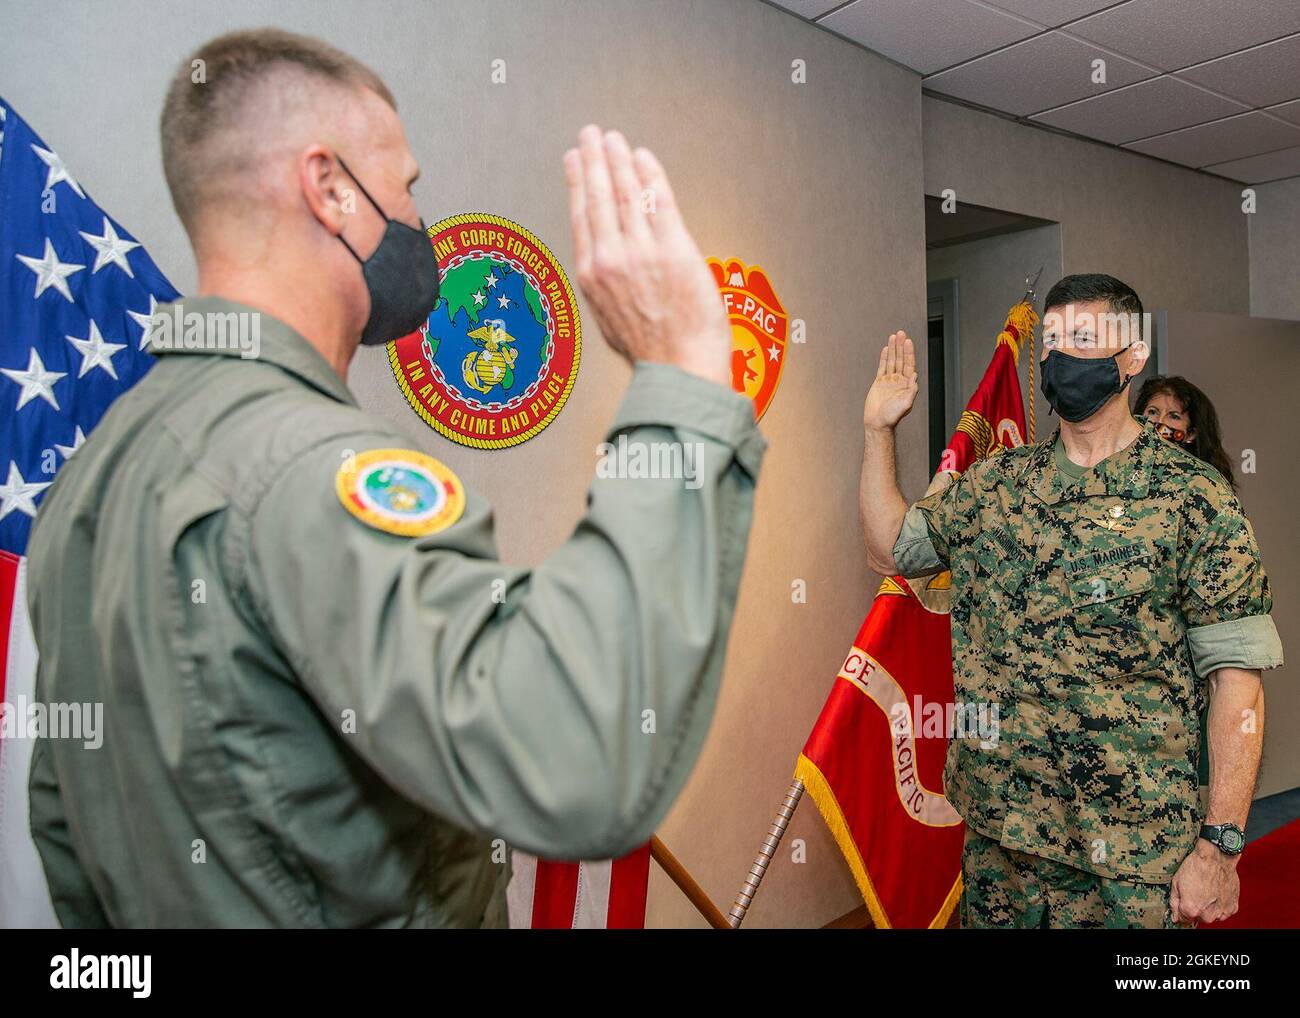 U.S. Marine Corps Lt. Gen. Rudder, left, commander, U.S. Marine Corps Forces, Pacific (MARFORPAC), administers the oath of office to Maj. Gen. Mark A. Hashimoto, commanding general, Force Headquarters Group, Marine Corps Forces Reserves, during his promotion ceremony on April 2, 2021 at Camp H.M. Smith, Hawaii. Hashimoto has served 29 years in the Marine Corps between active duty and the reserves. As a civilian he serves as the executive director, MARFORPAC. Stock Photo